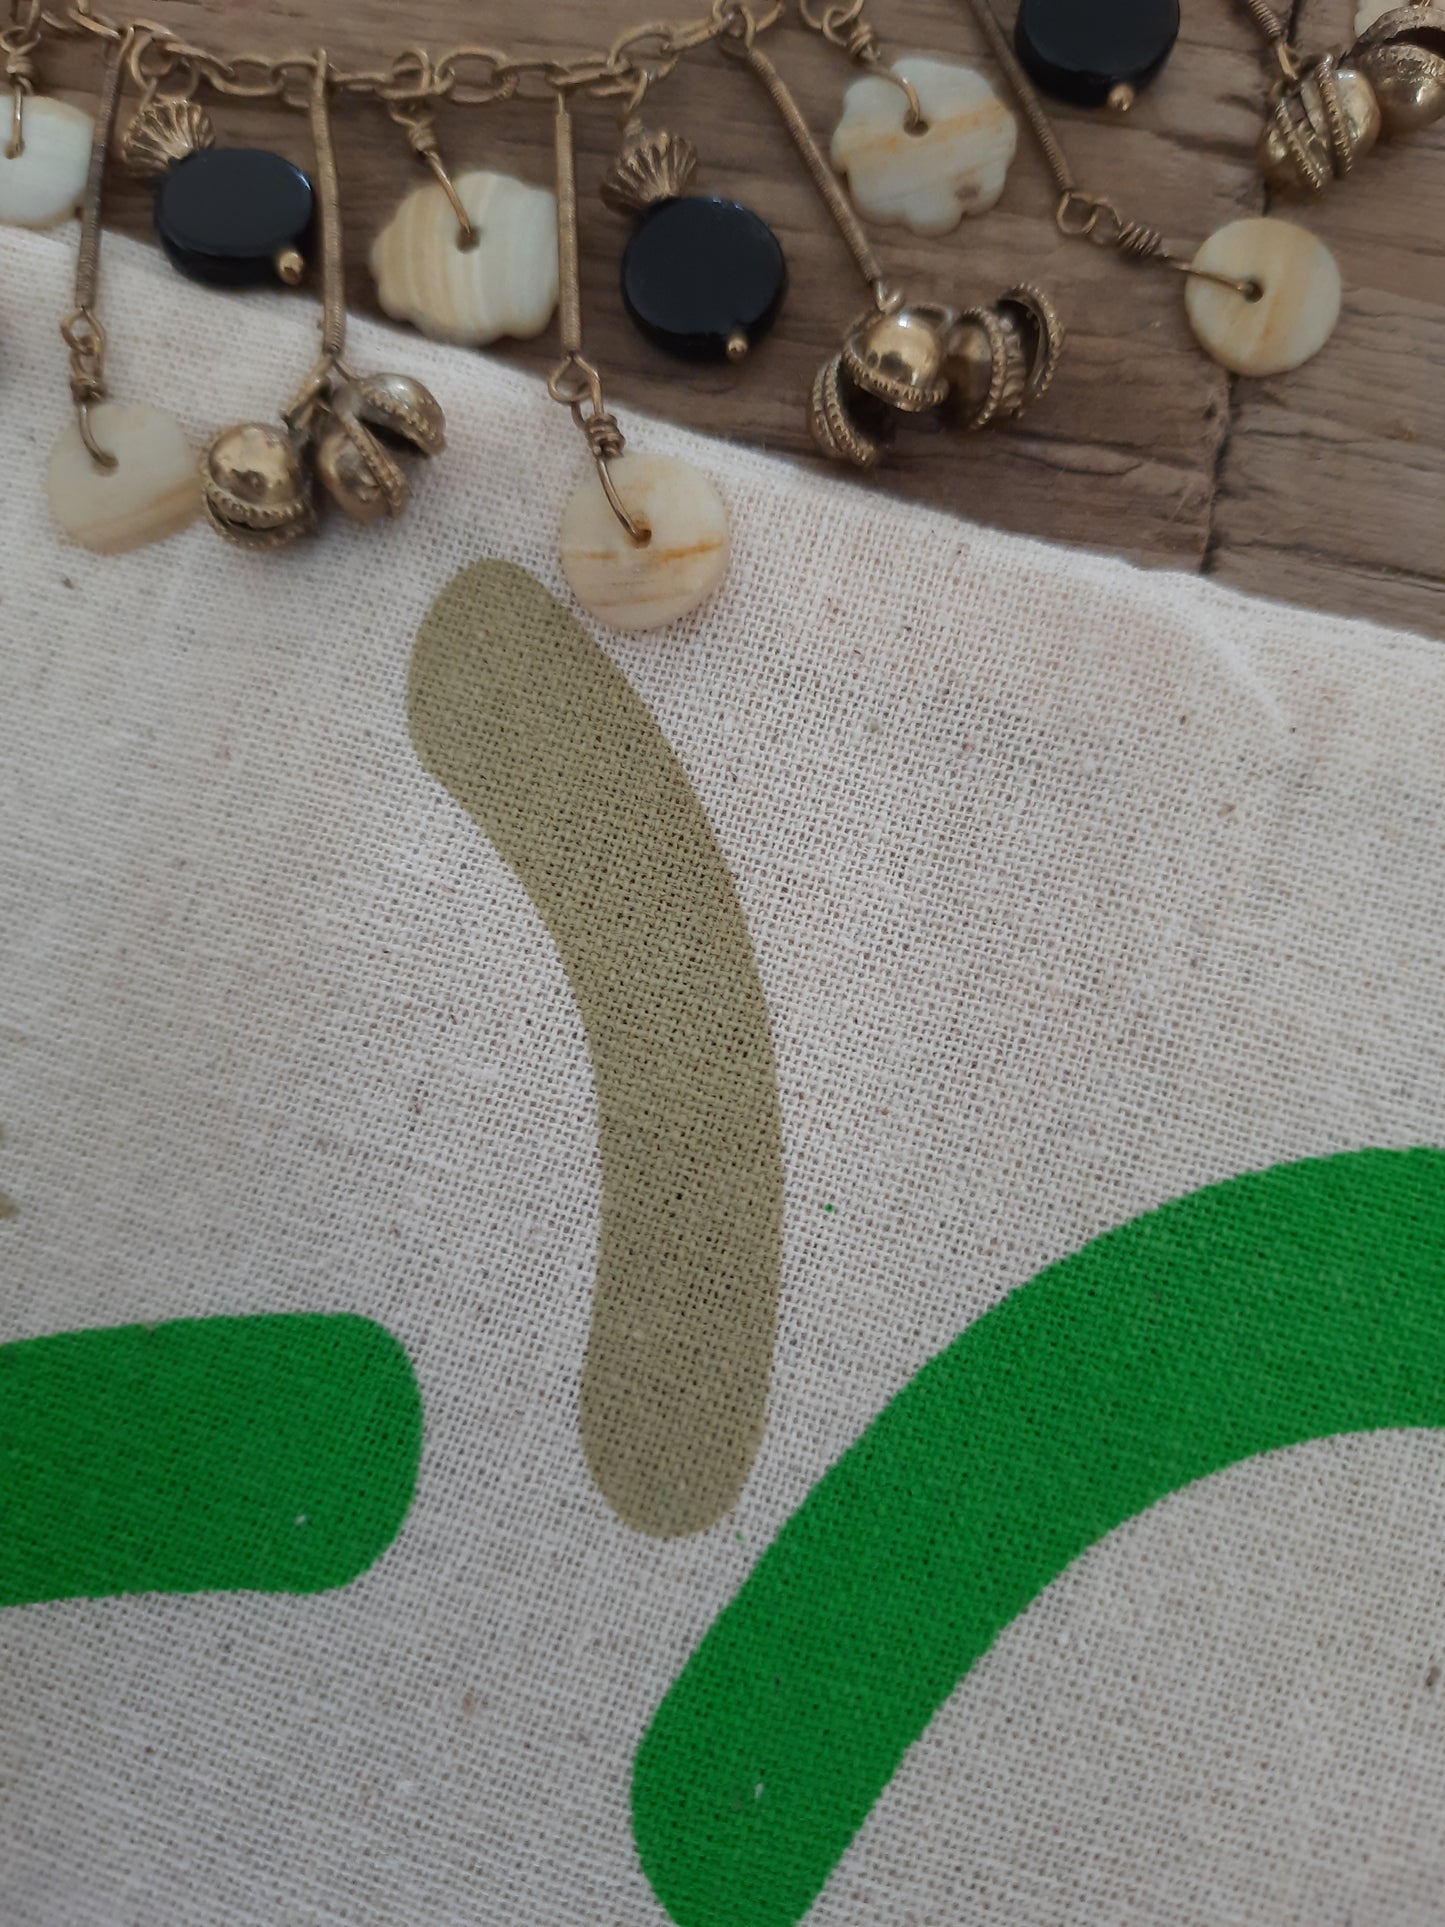 Necklaces, Gift Ideas, Ethical Store, Fairtrade UK Products, BIG GREEN APPLE